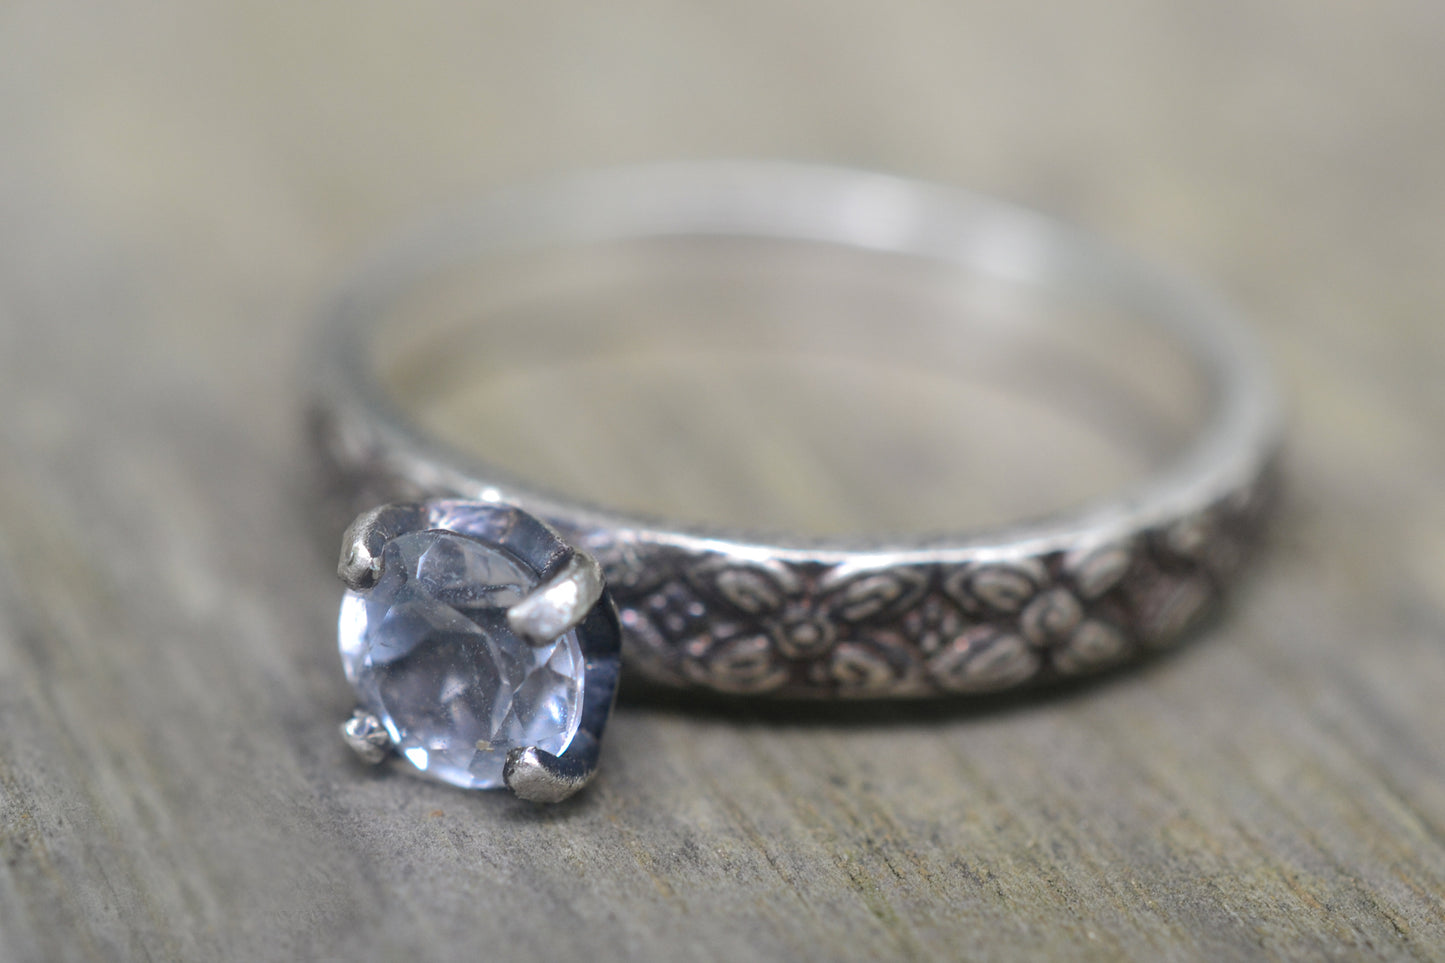 5mm Round Faceted White Topaz Poesy Ring